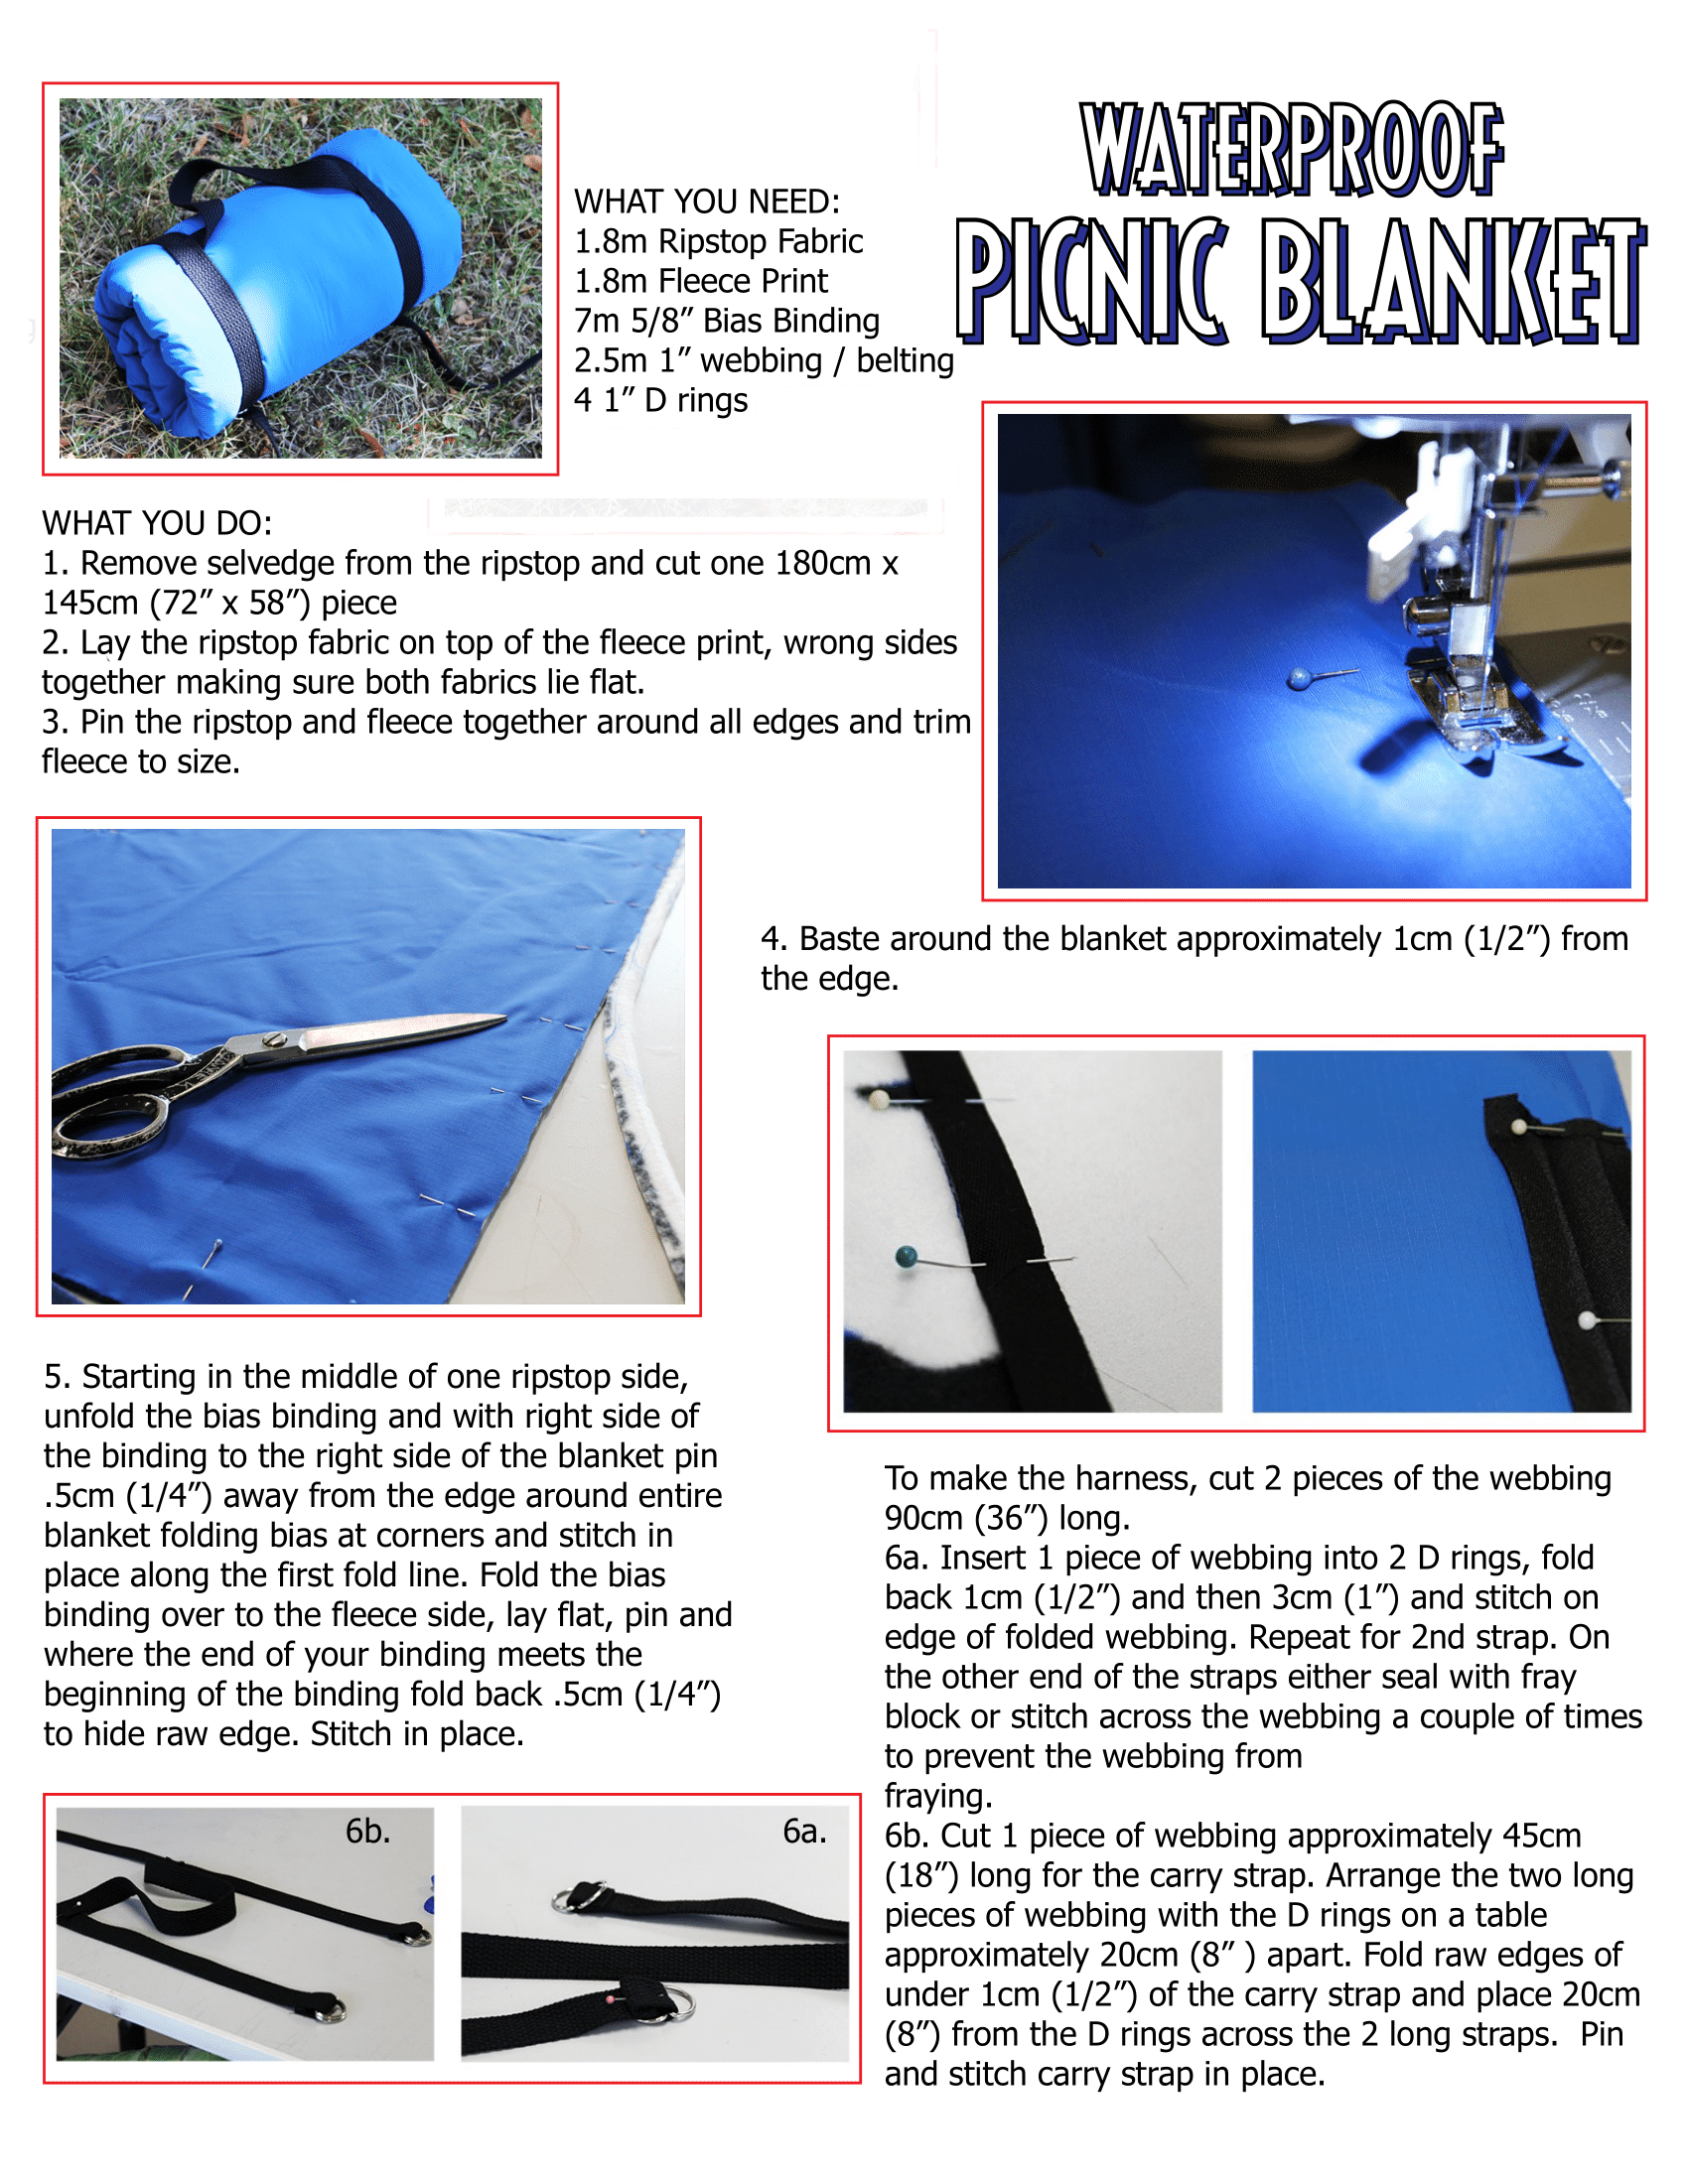 Requried materials & steps to make a waterproof picnic blanket